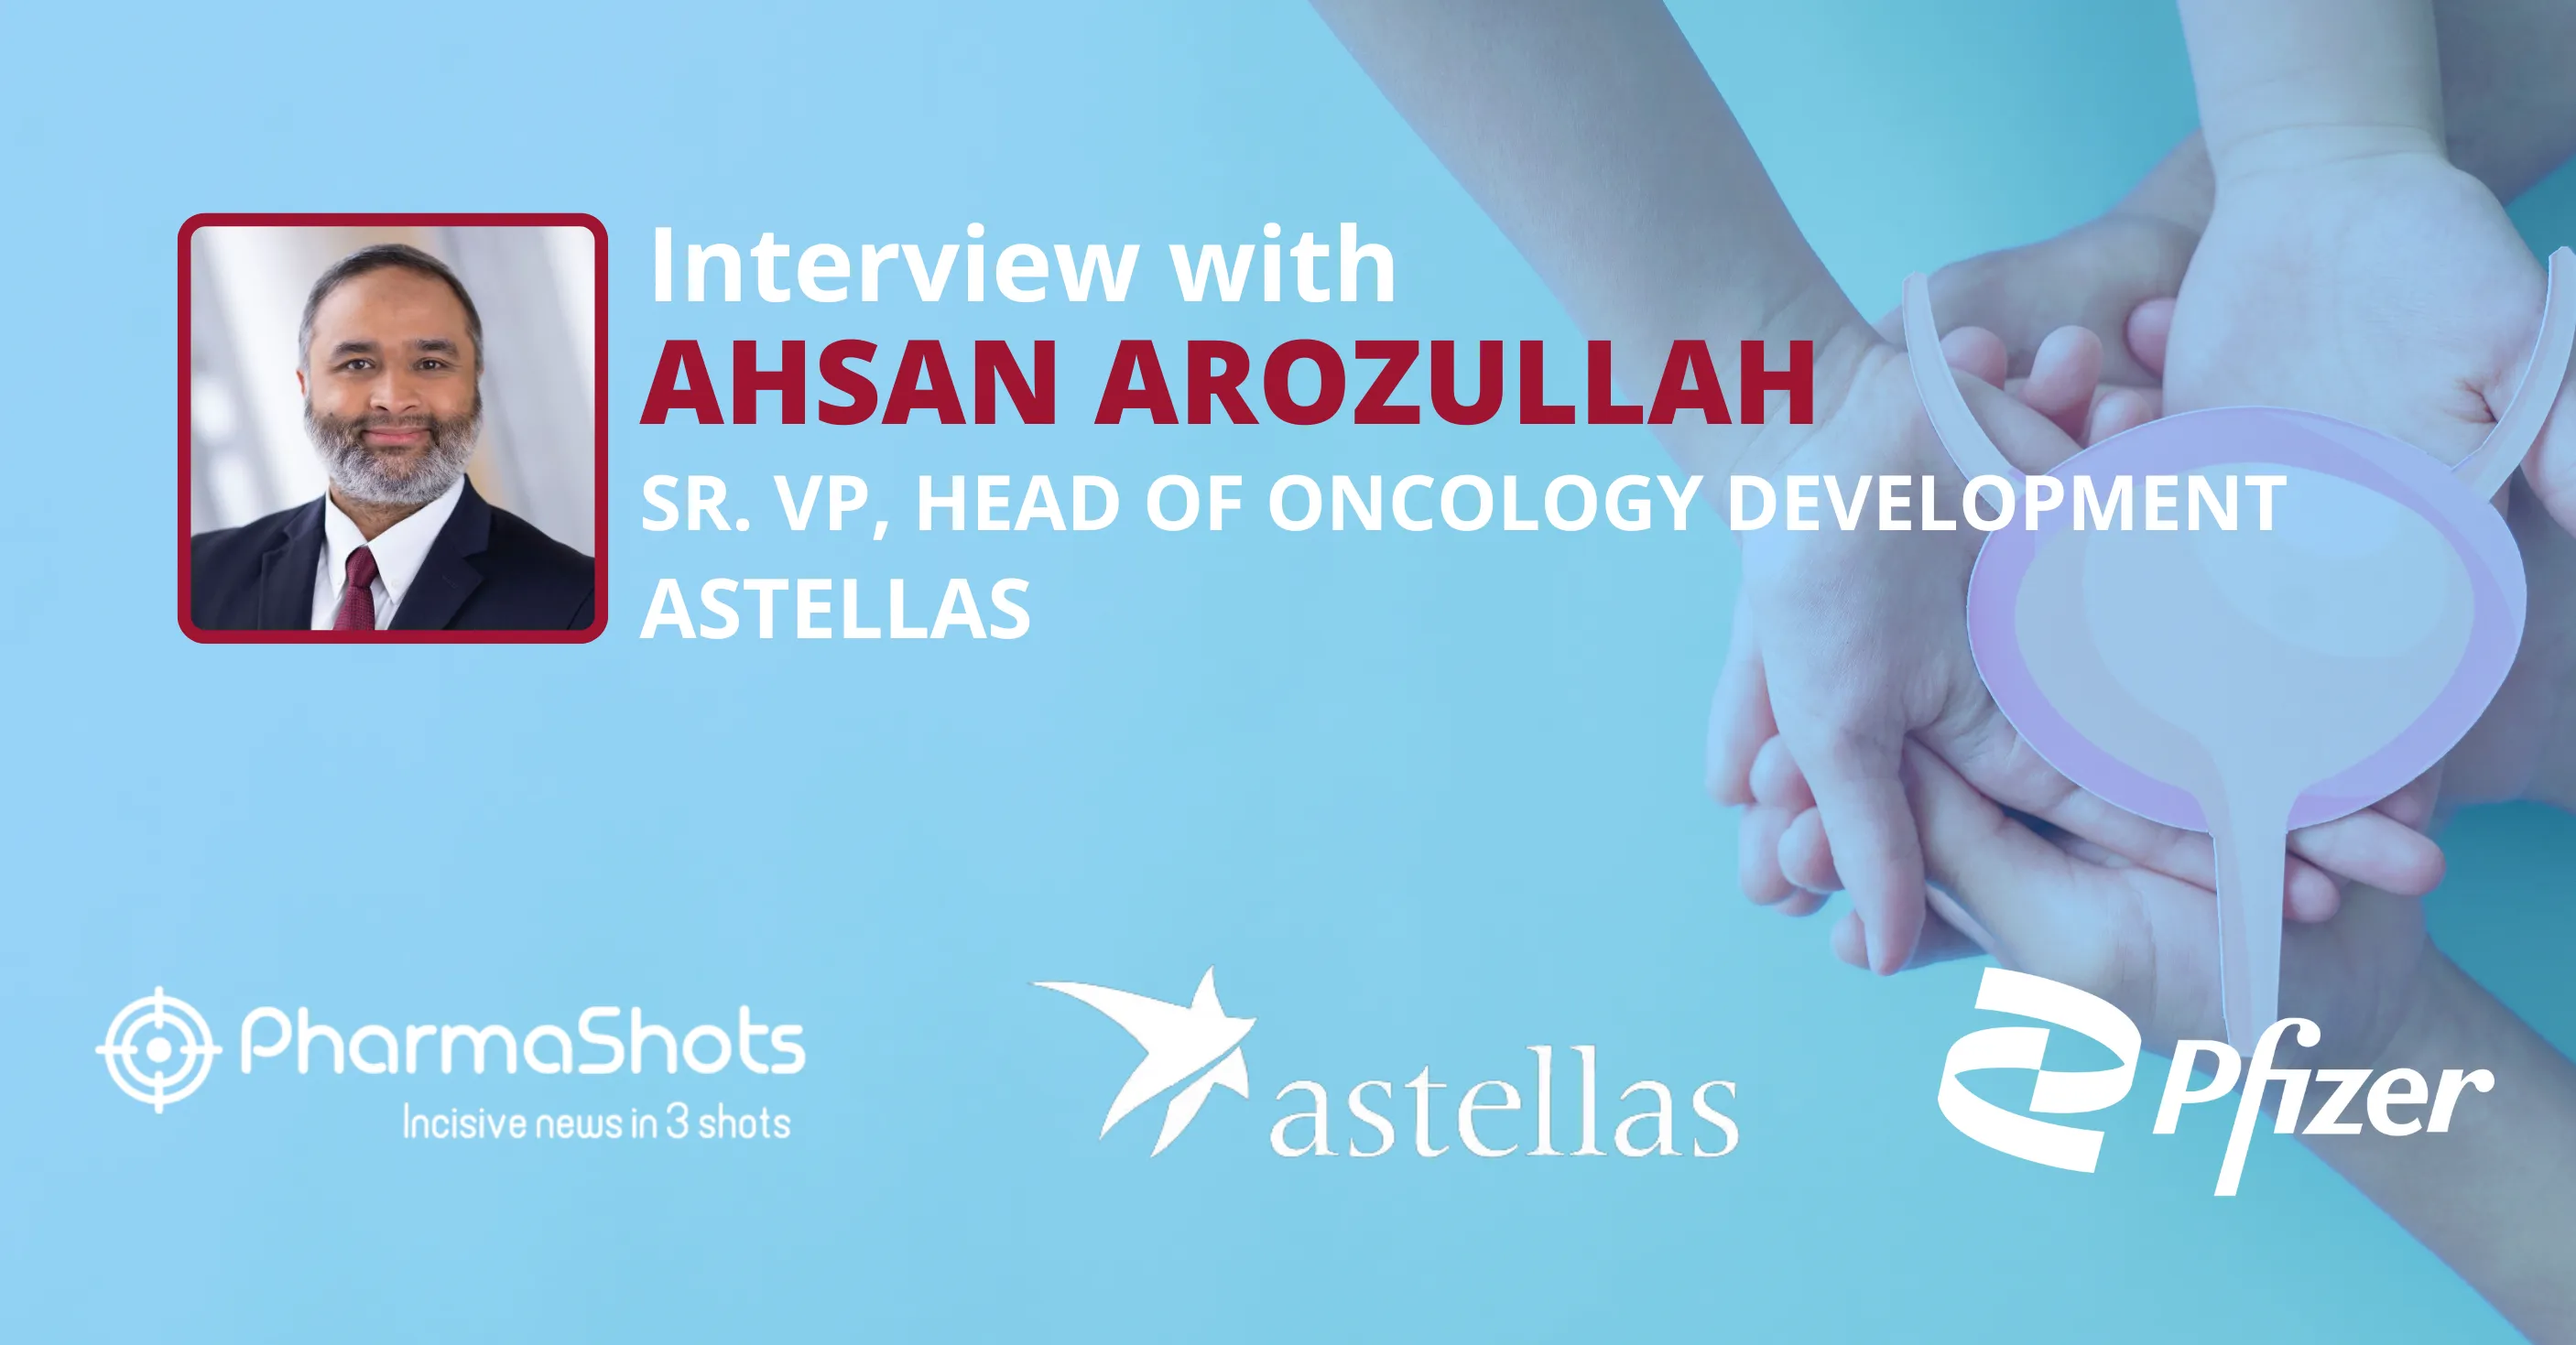 A New Hope in Bladder Cancer Combination Therapy: PharmaShots in Conversation with Ahsan Arozullah